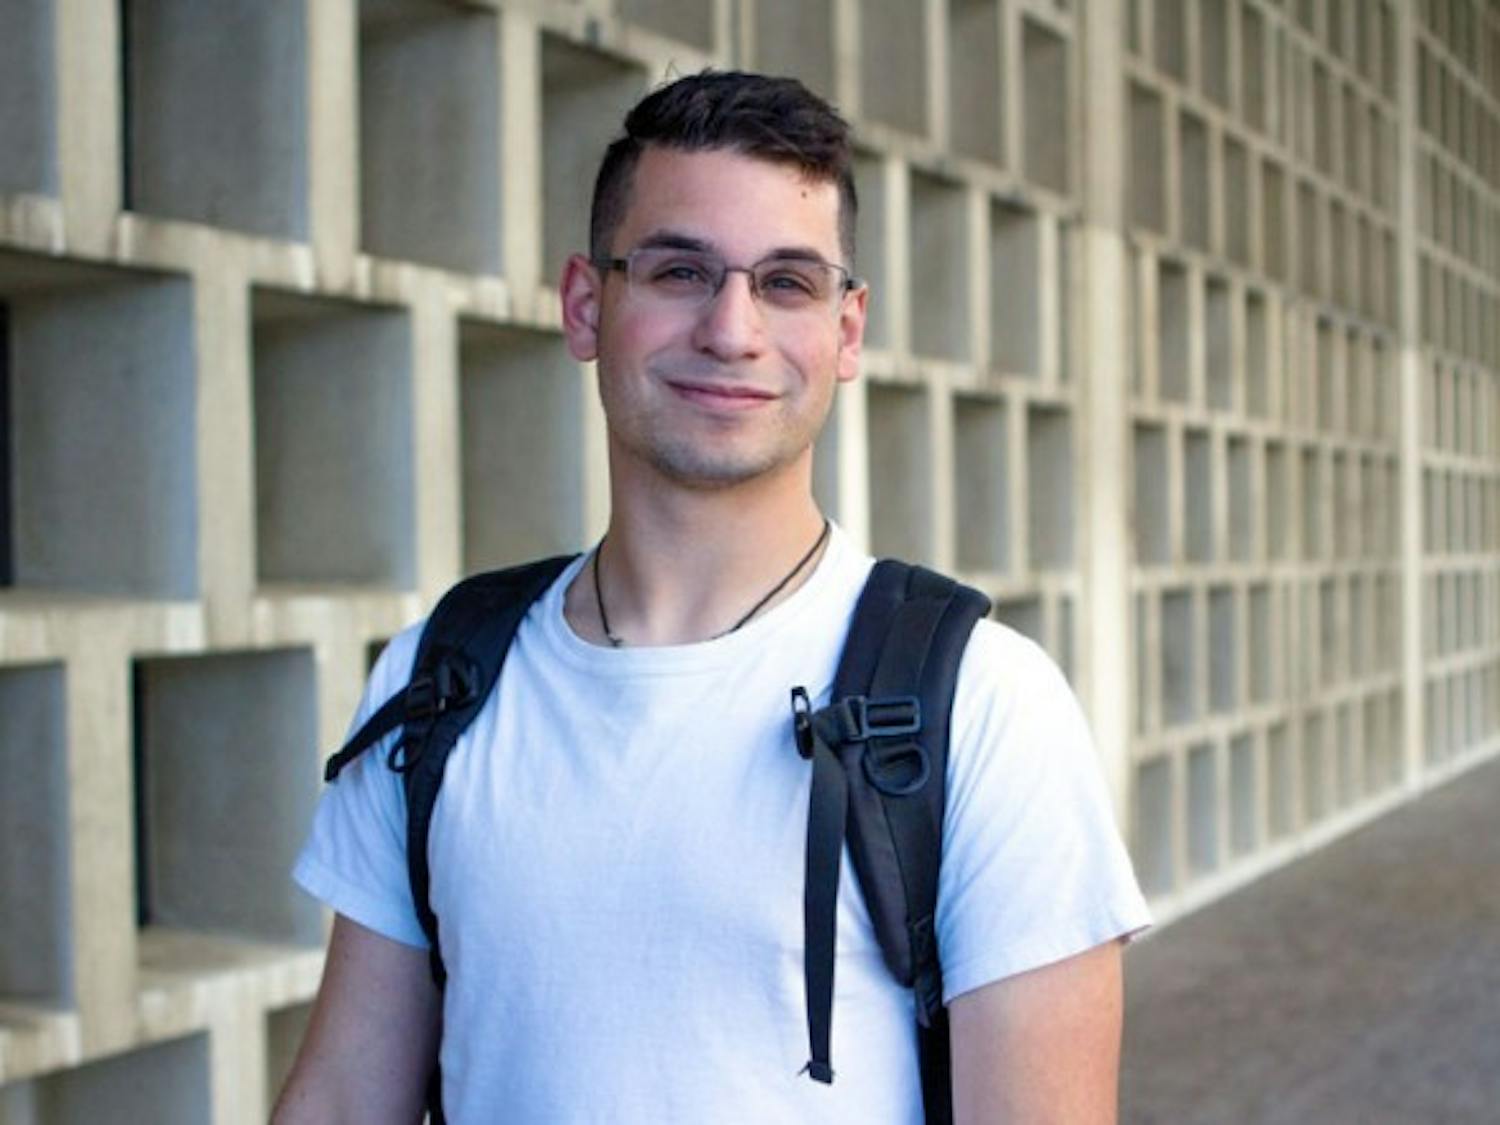 David Harary, a senior economics, geography and international trade major, founded the Center for Development and Strategy to uplift and promote other students.
Chad Cooper, The Spectrum